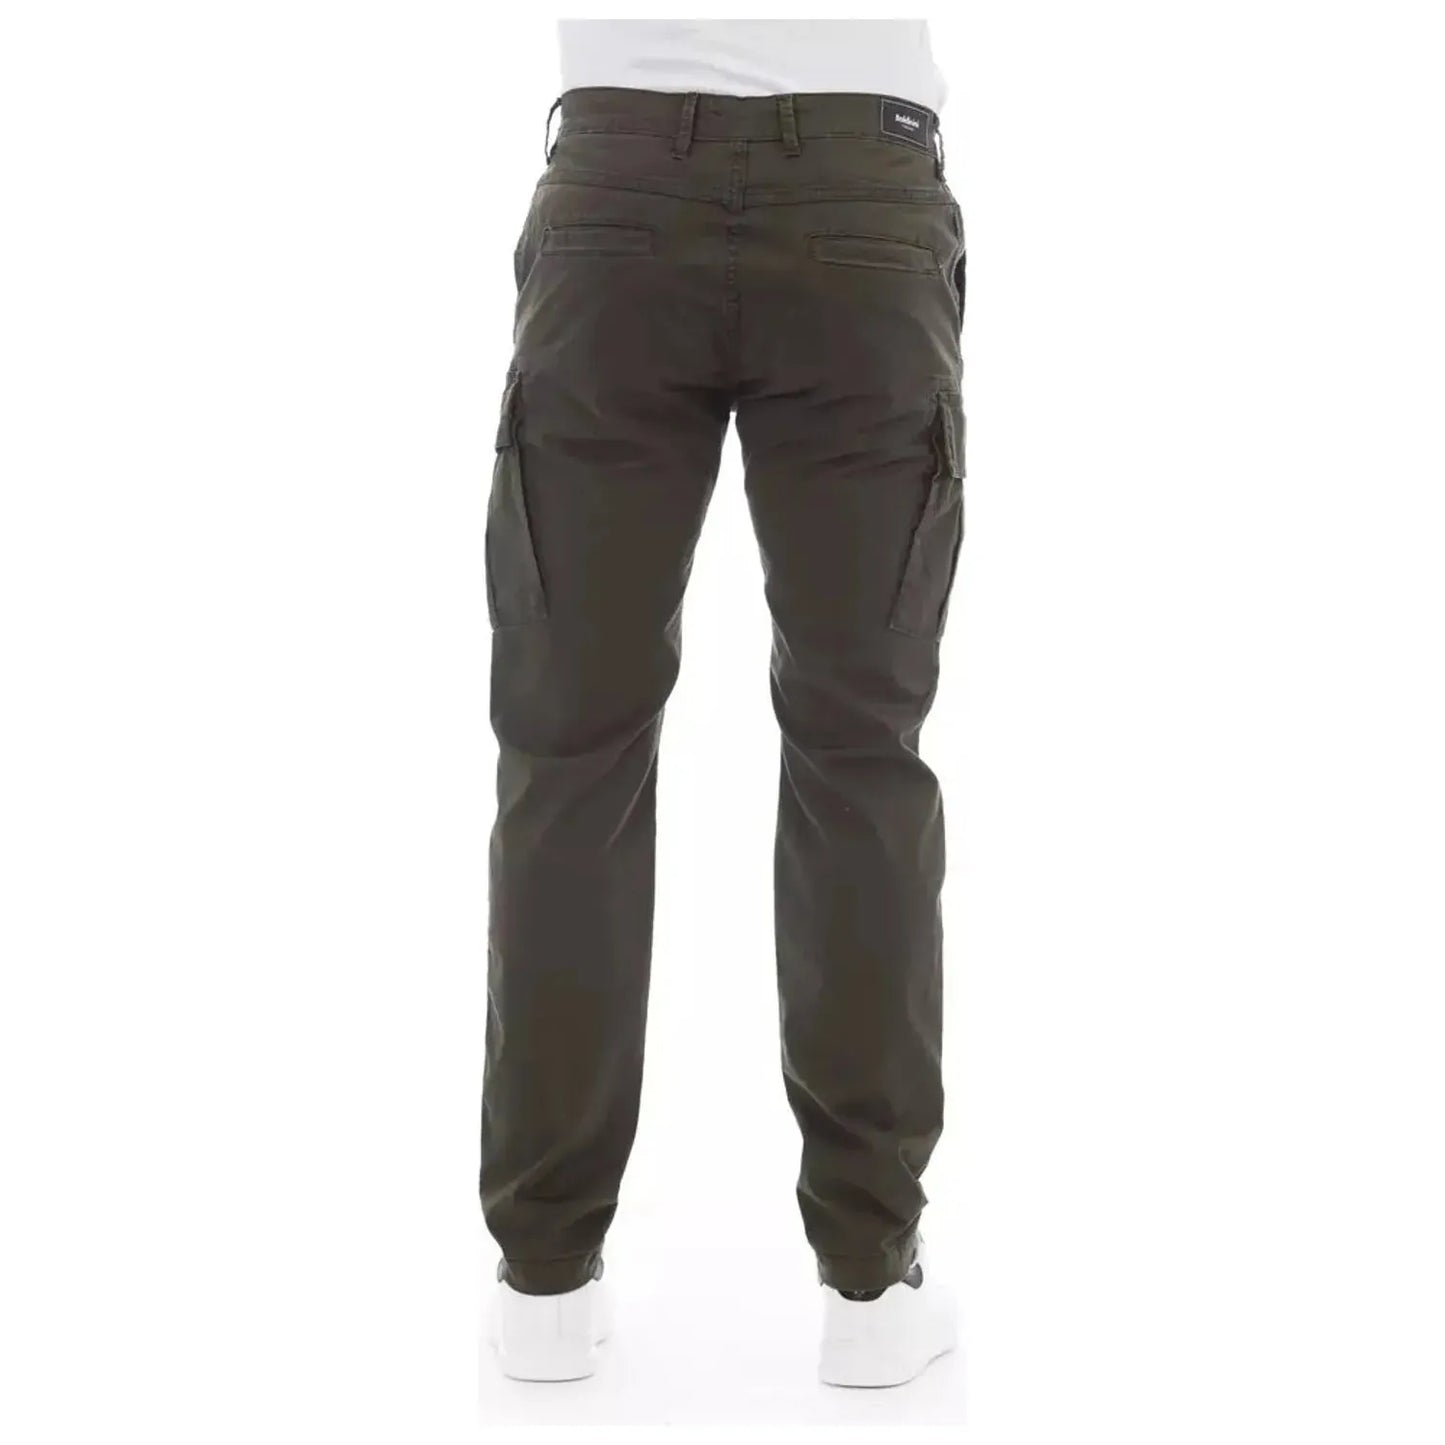 Baldinini Trend Chic Army Cargo Trousers for Men army-cotton-jeans-pant-4